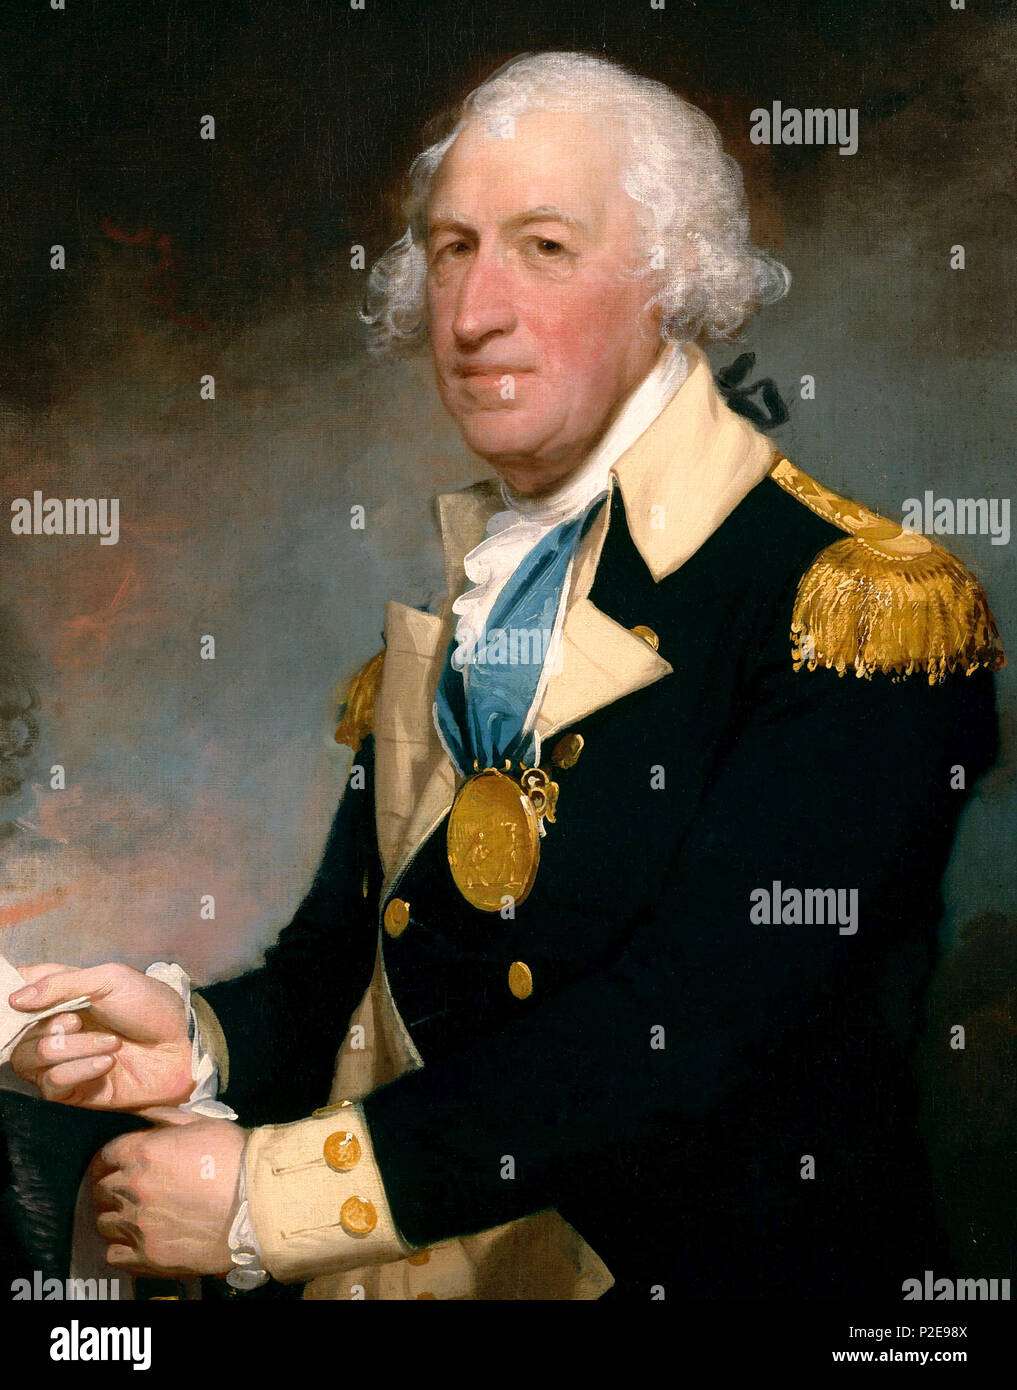 Horatio Lloyd Gates (1727 – 1806) British soldier who served as an American general during the Revolutionary War. Portrait by Gilbert Stuart, Stock Photo